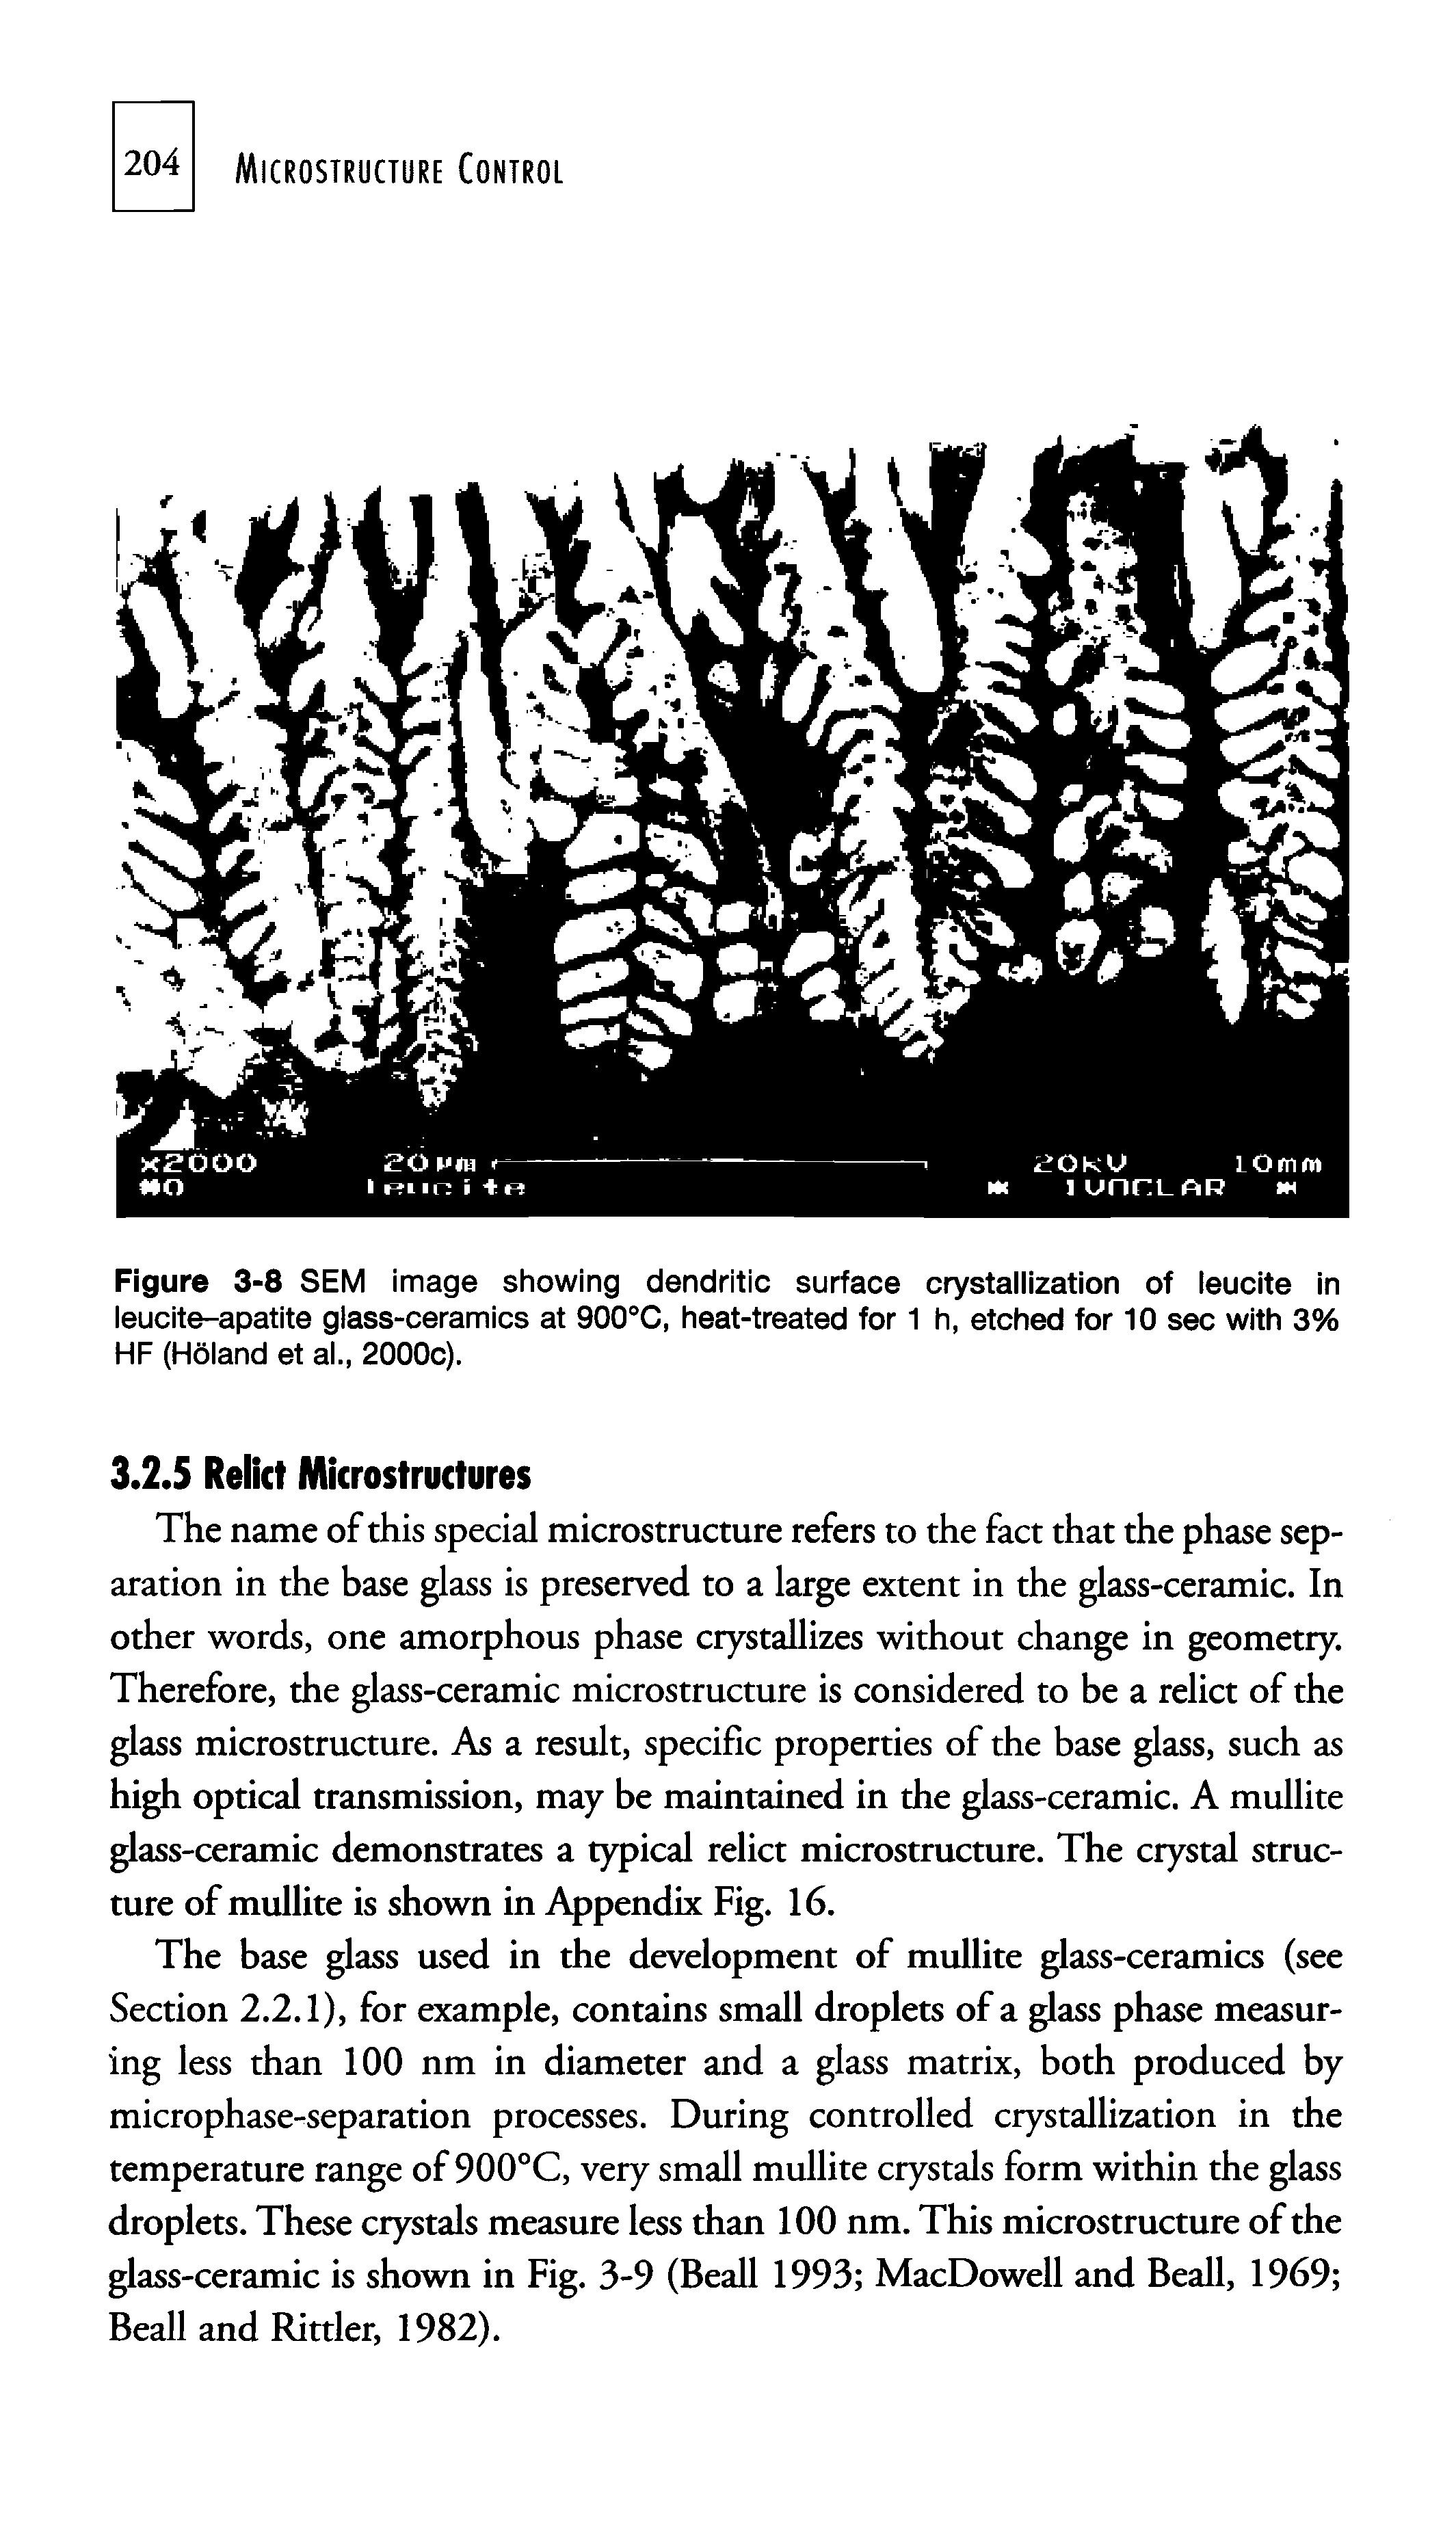 Figure 3-8 SEM image showing dendritic surface crystallization of leucite in leucite-apatite glass-ceramics at 900°C, heat-treated for 1 h, etched for 10 sec with 3% HF (Haiand et al., 2000c).